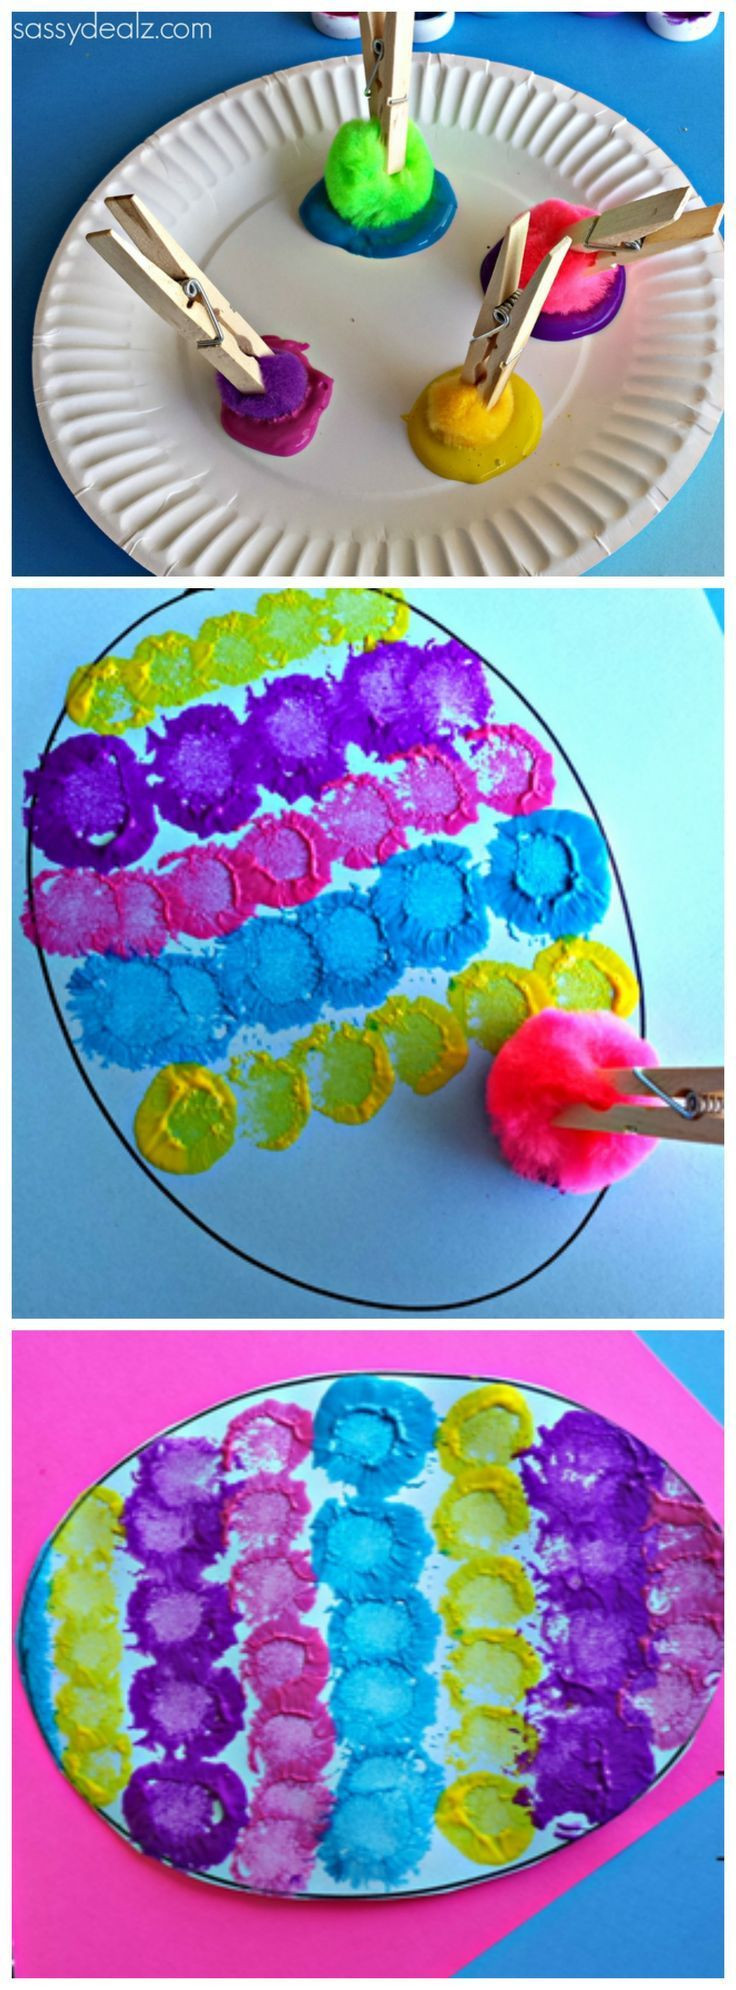 Spring Crafts For Toddlers
 6 Amazing craft activities for kids